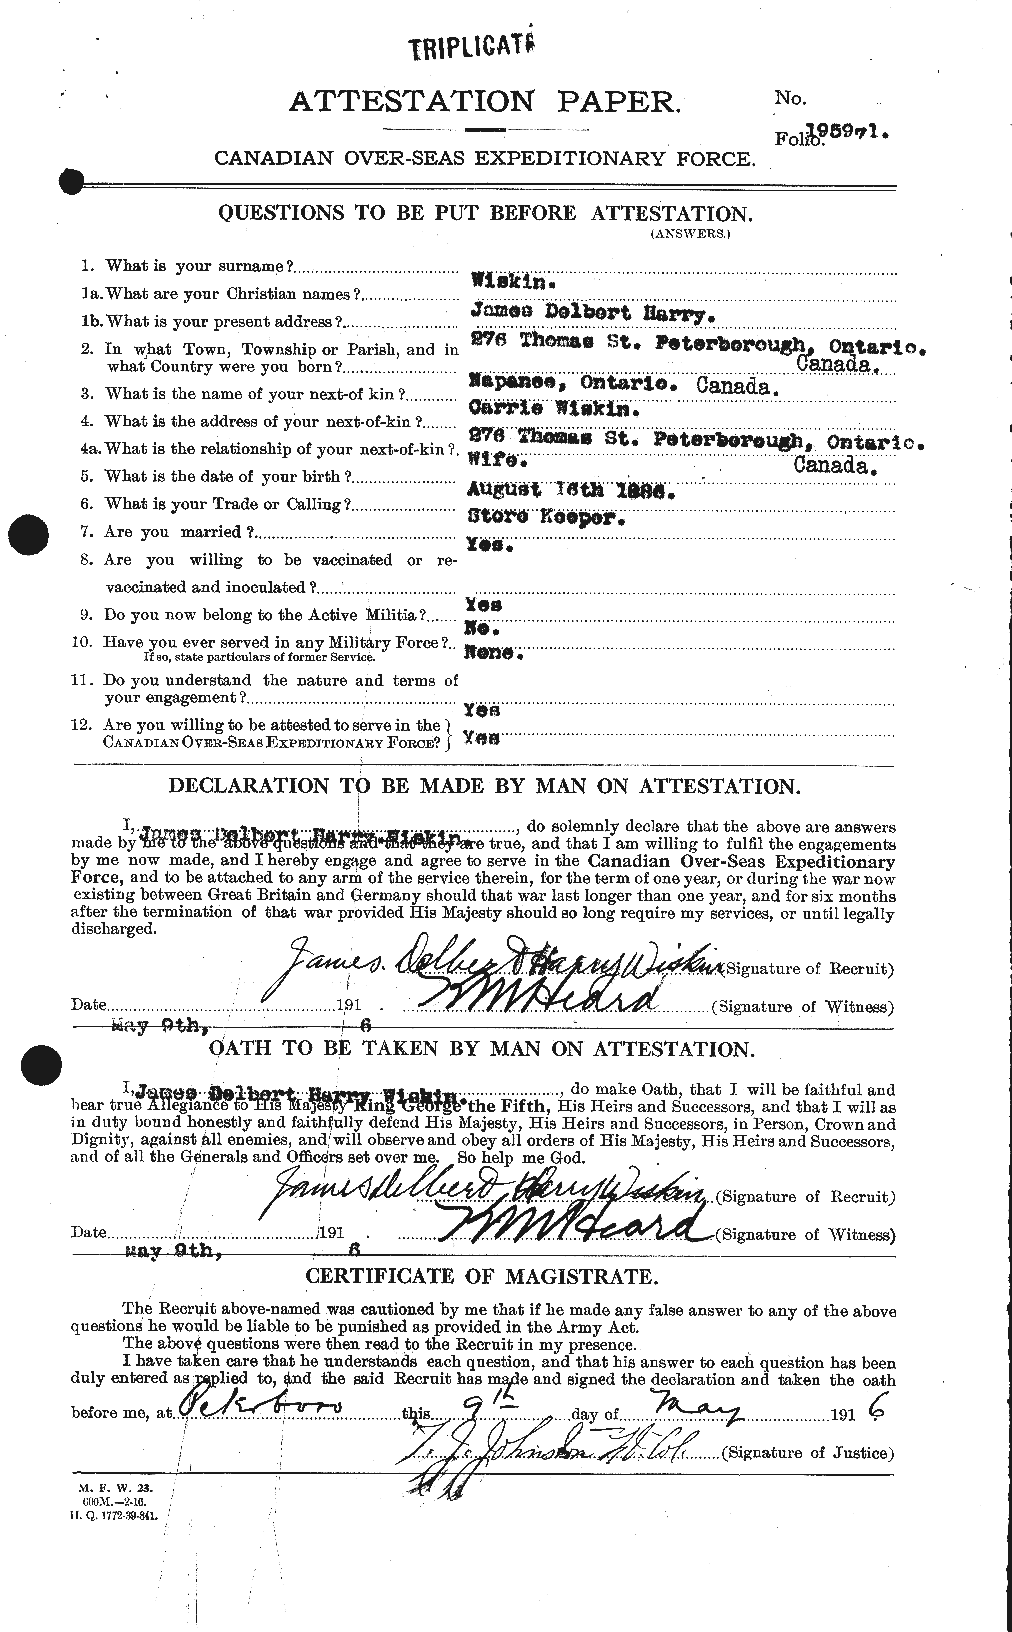 Personnel Records of the First World War - CEF 679812a